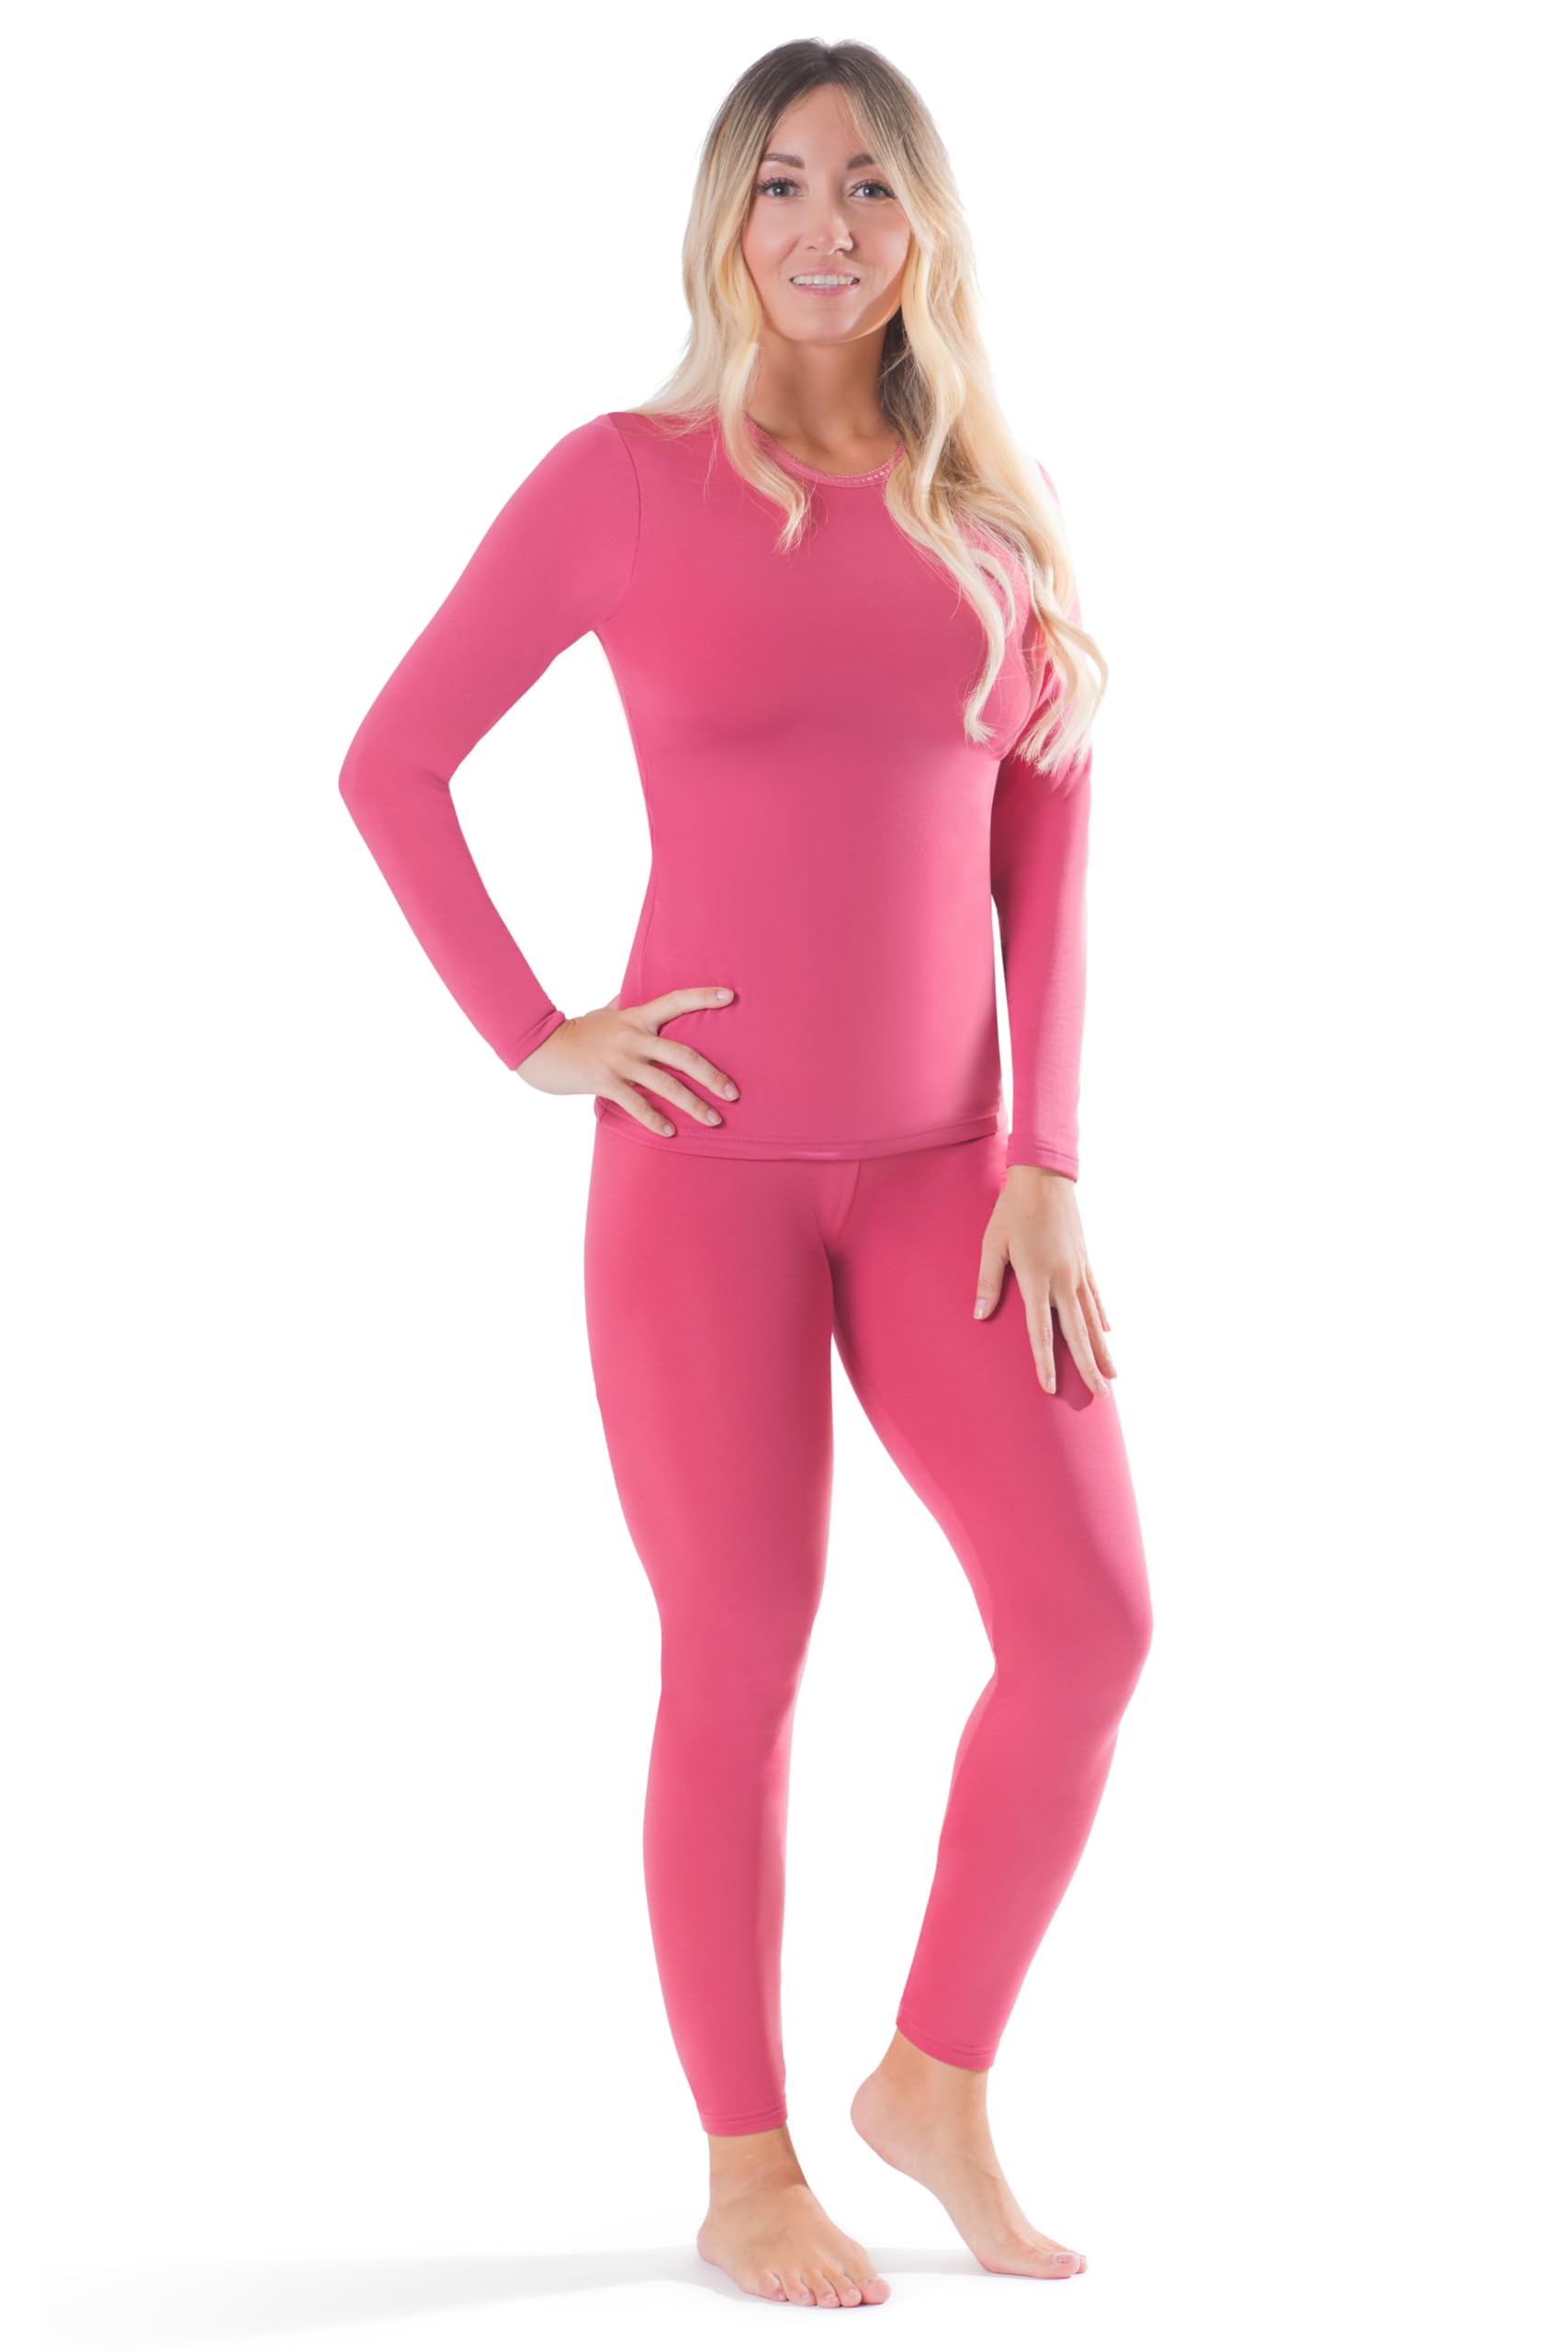 Buy Rocky Thermal Underwear for Women (Long Johns Thermals Set